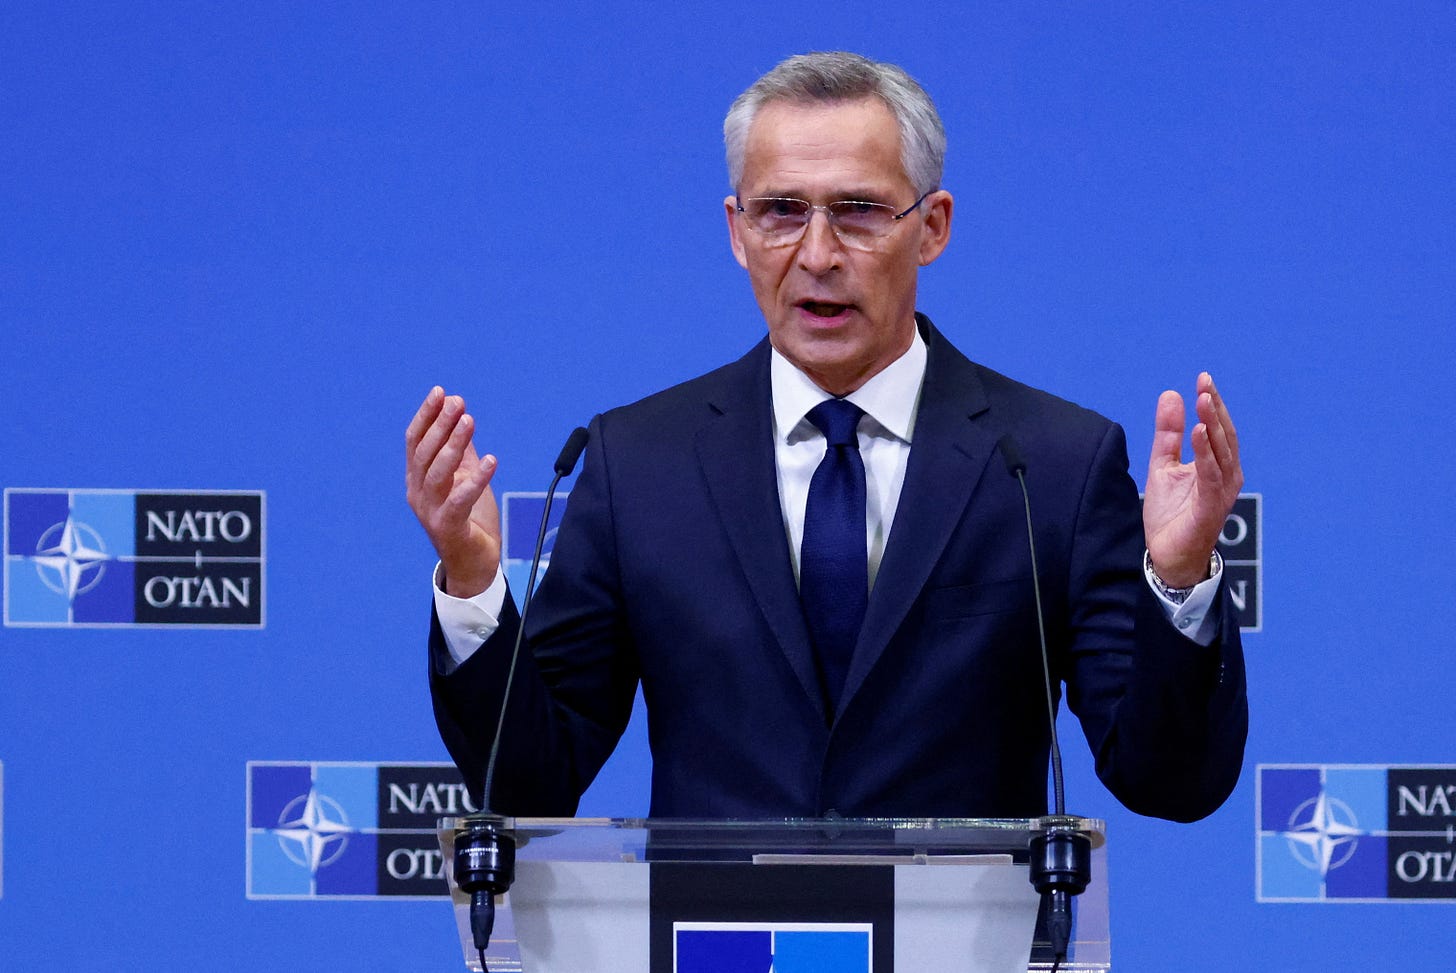 NATO's Stoltenberg will not seek another extension of his term,  spokesperson says | Reuters